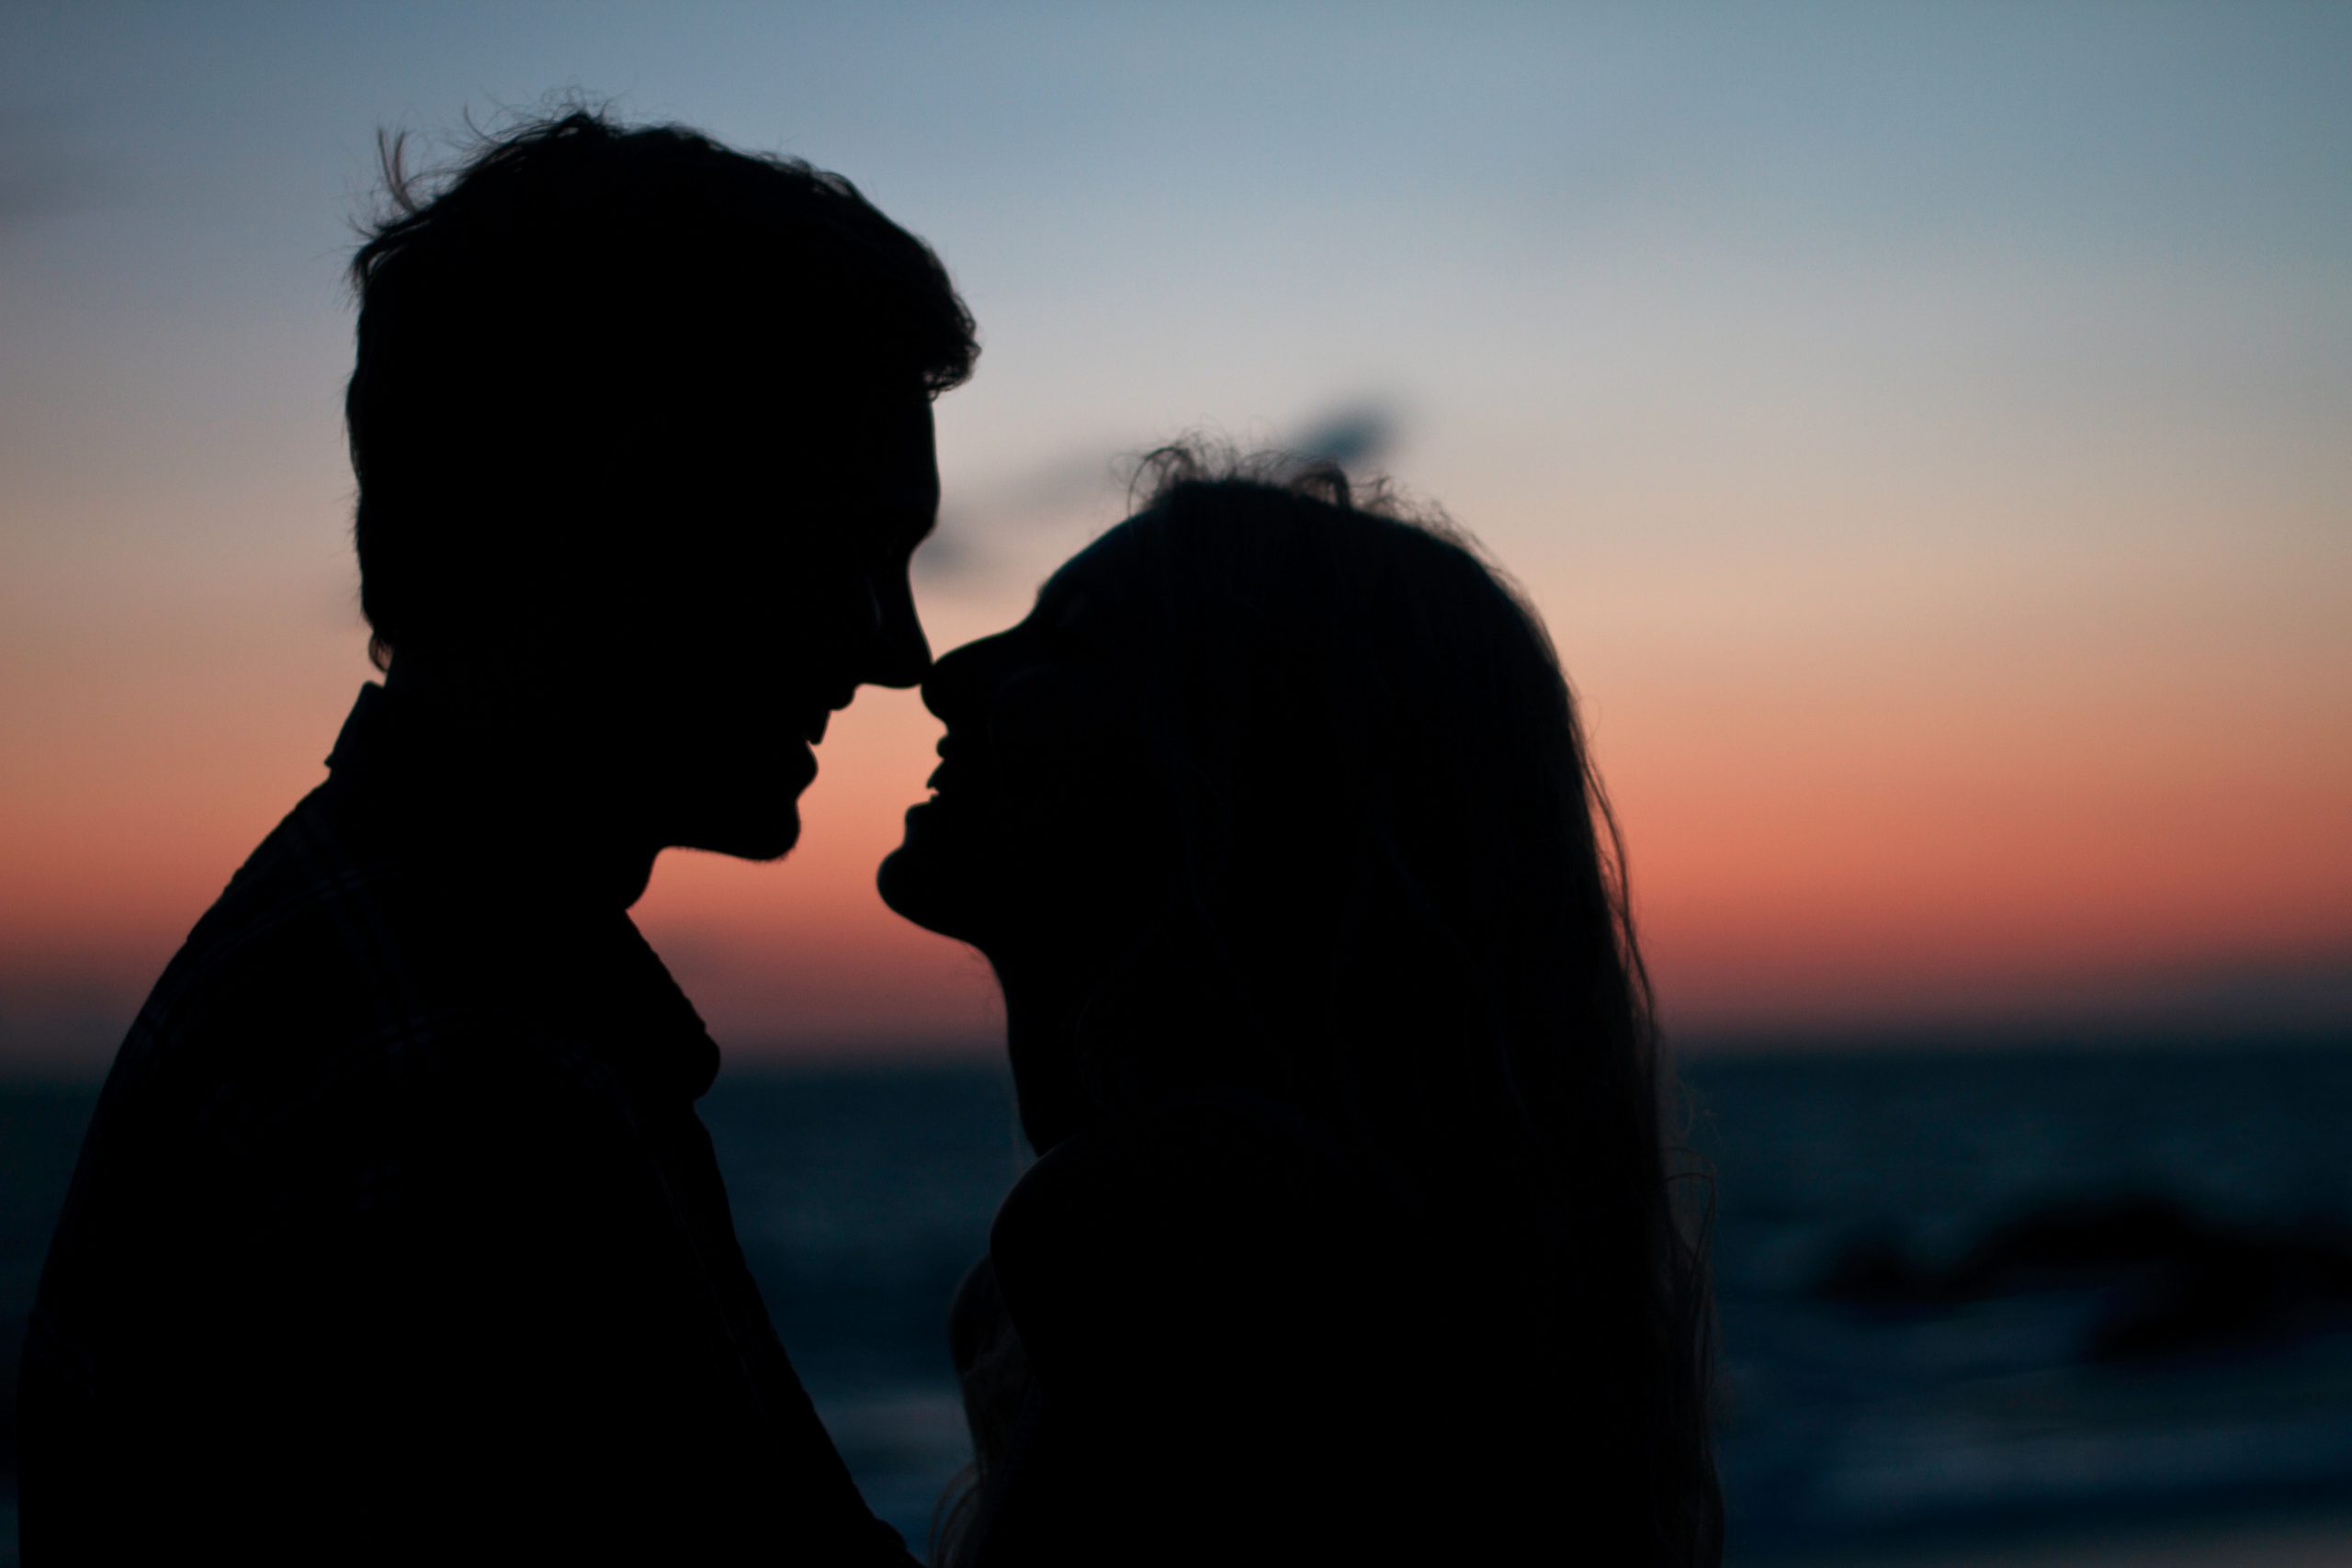 Silhouette of a couple in front of a sunset.